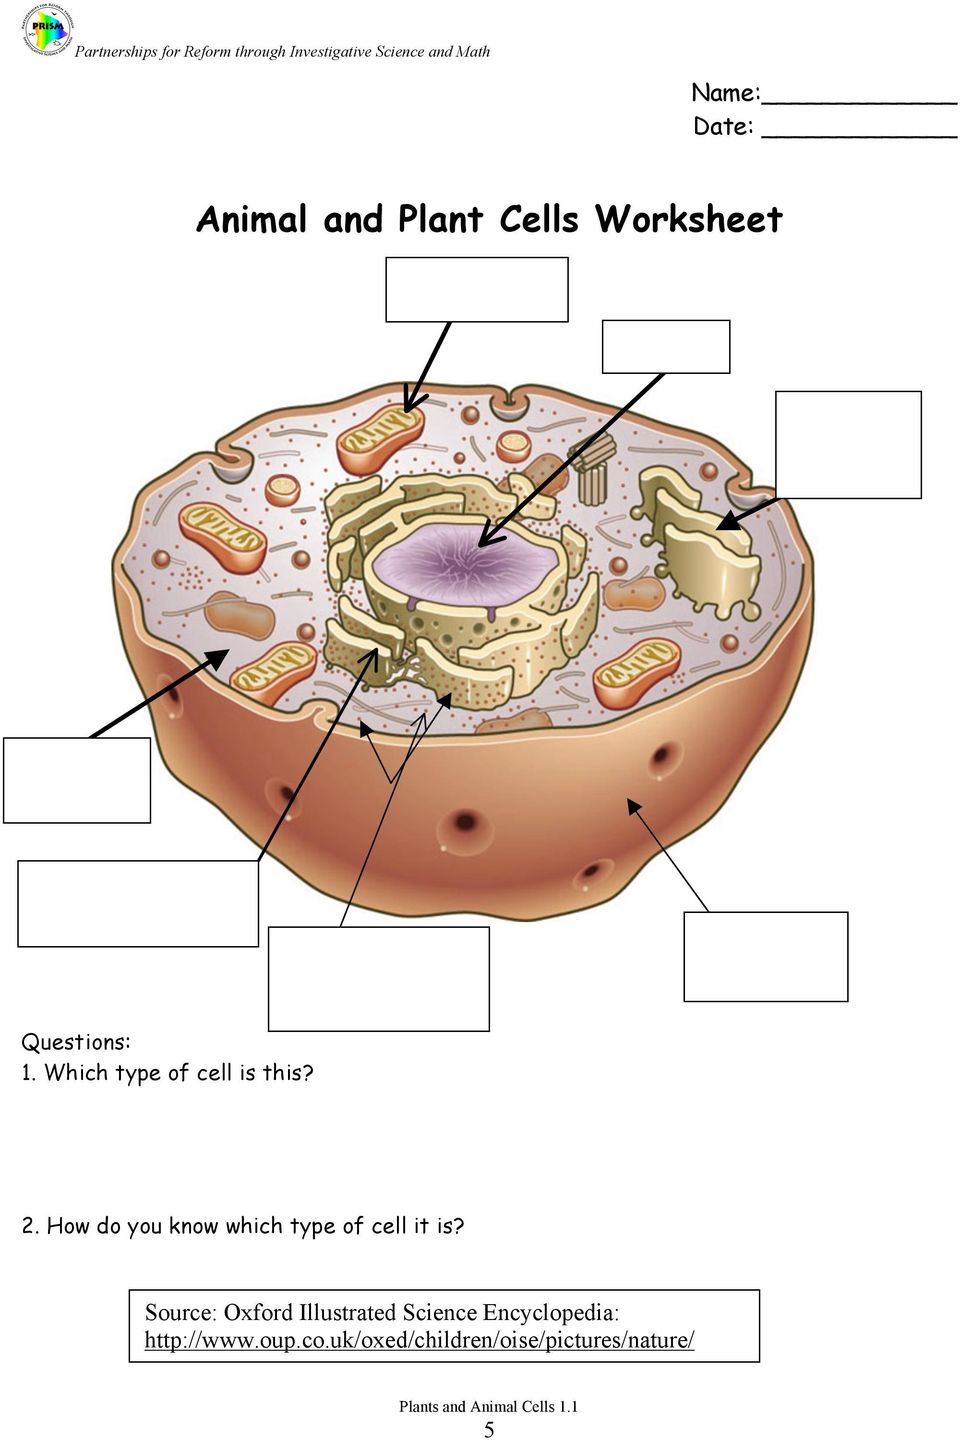 How do you know which type of cell it is?